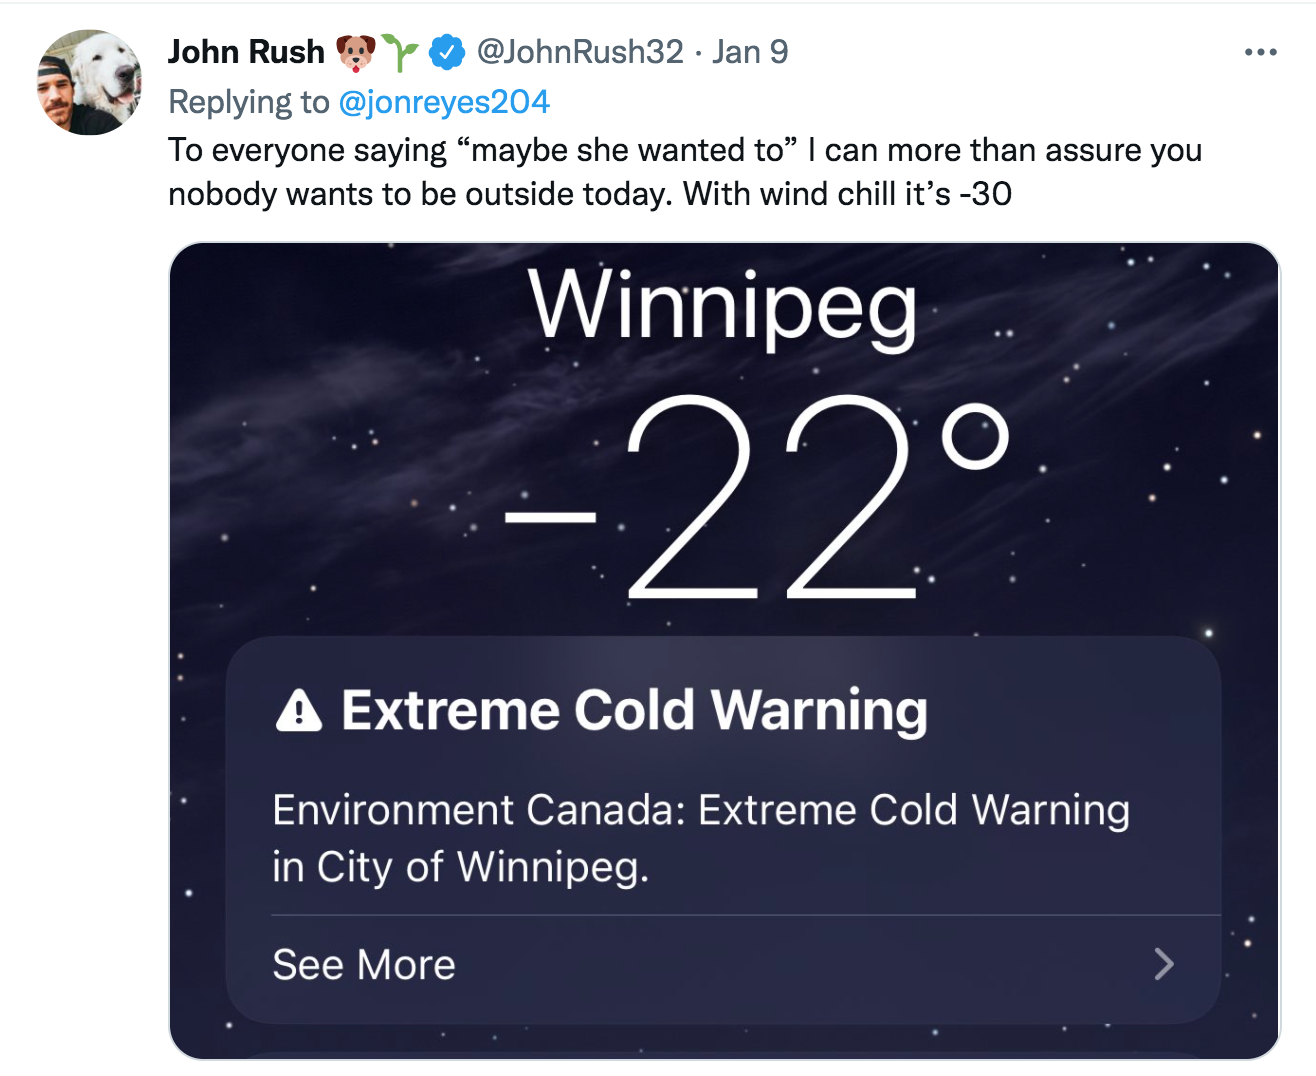 Husband Roasts For Snow Shoveling Tweet - multimedia - John Rush Rush32. Jan 9 To everyone saying "maybe she wanted to" I can more than assure you nobody wants to be outside today. With wind chill it's 30 Winnipeg O 22 A Extreme Cold Warning Environment C